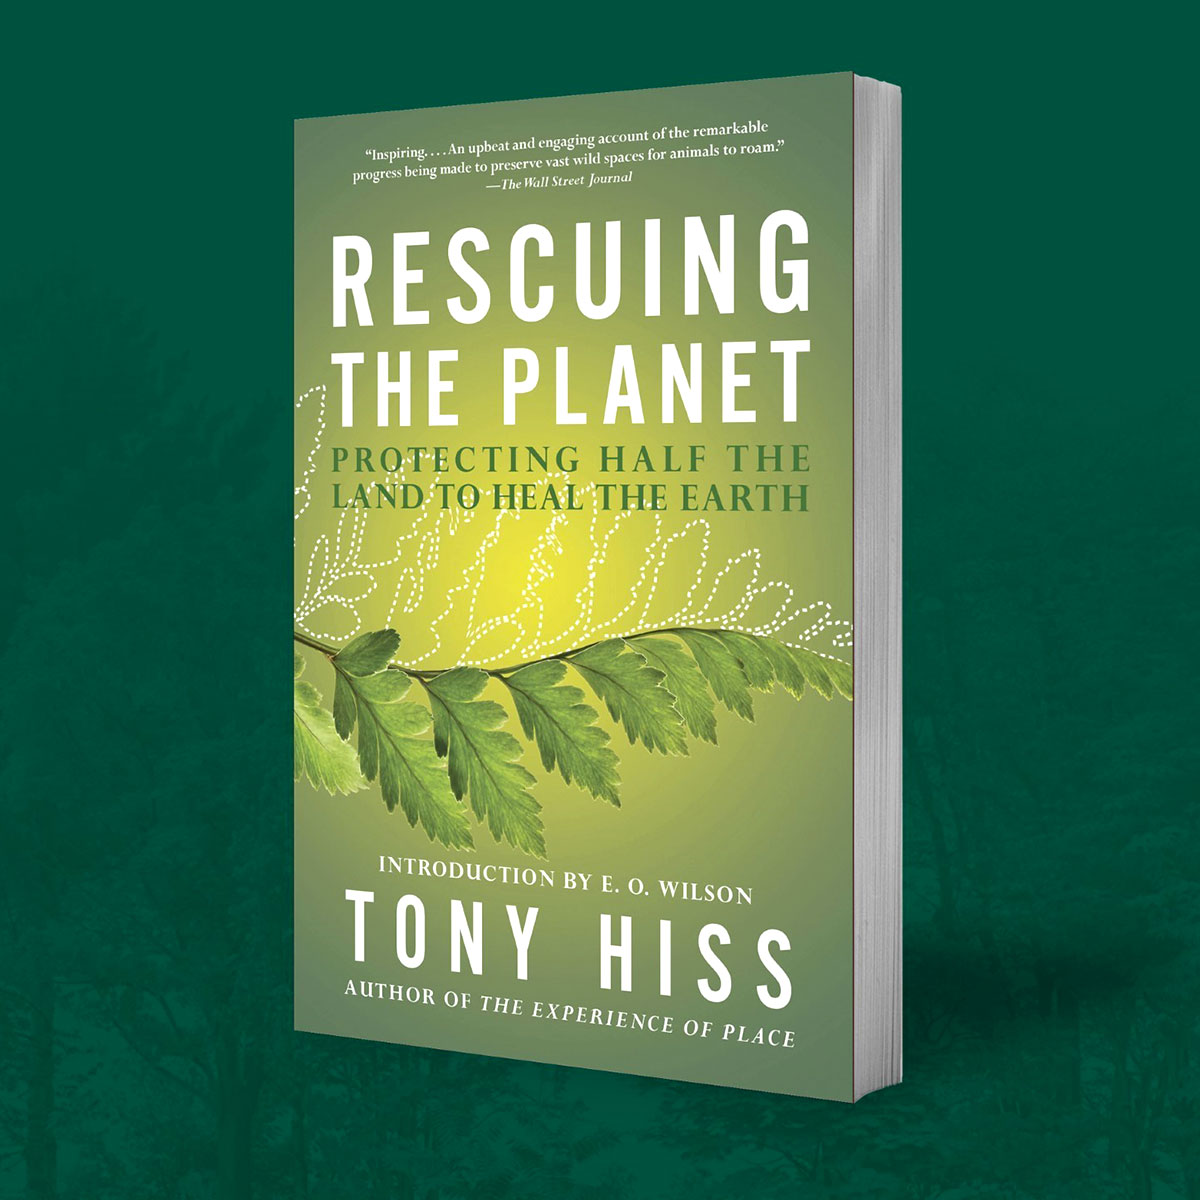 Listen in as Matt interviews breakthrough Author Tony Hiss. He explains how we could save millions of species from extinction by conserving about 50% of the planet's land and water by 2050.

Tony Hiss is the author of fifteen books, including the award-winning The Experience of…